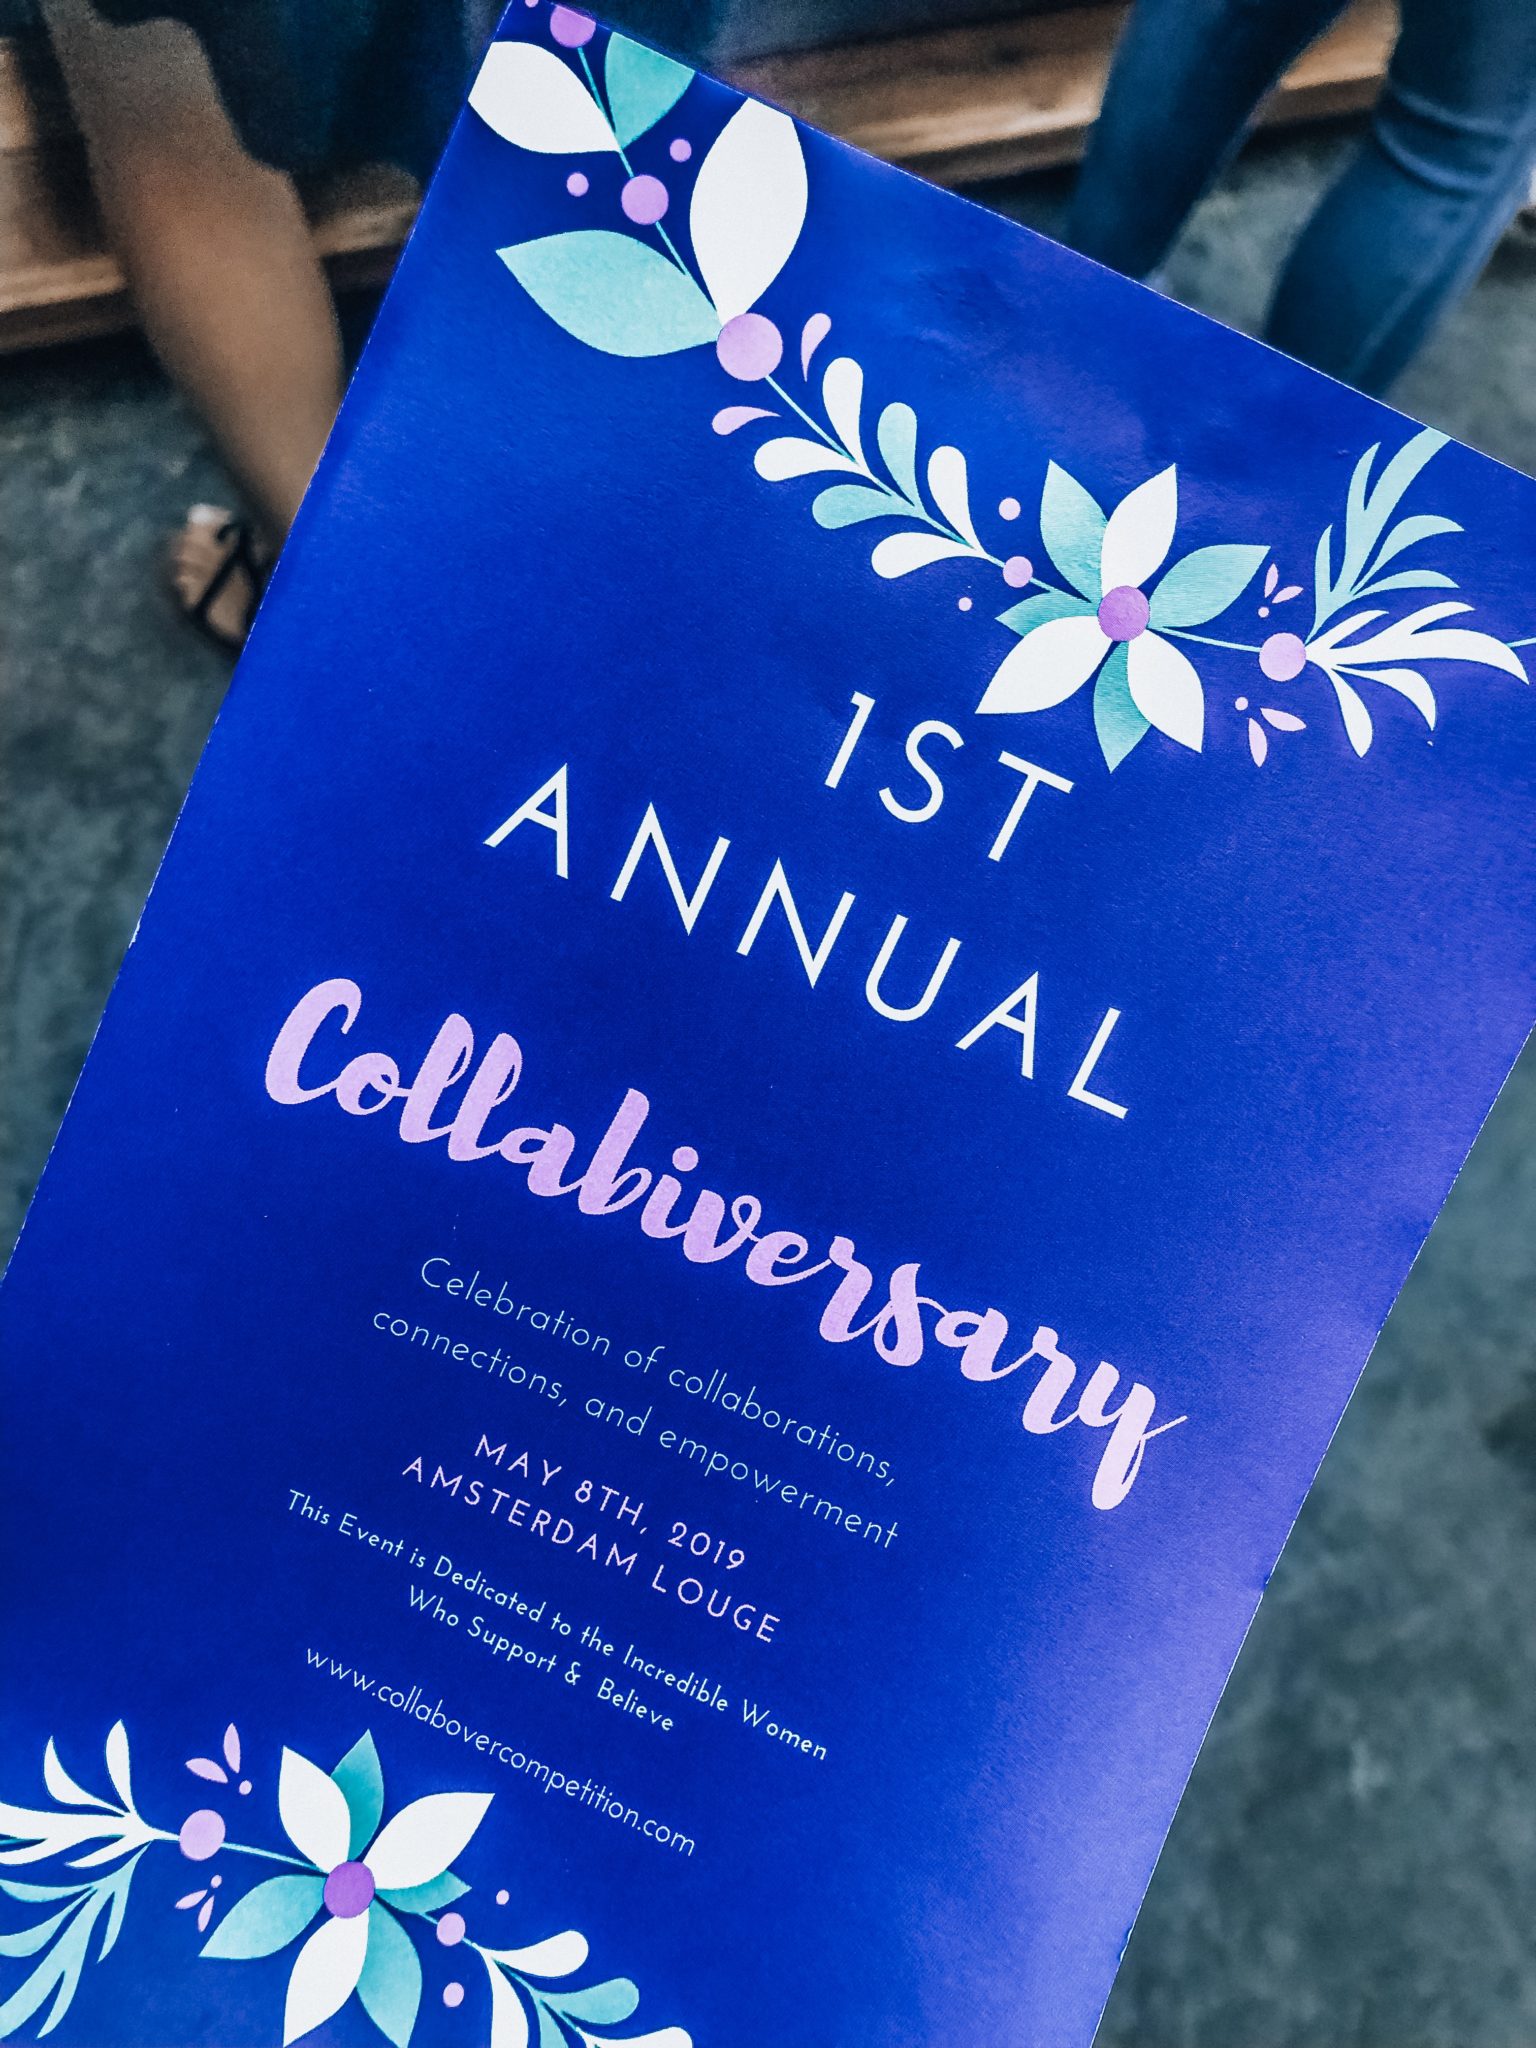 First Annual Collaboration Over Competition “Collabiversary” Mixer!